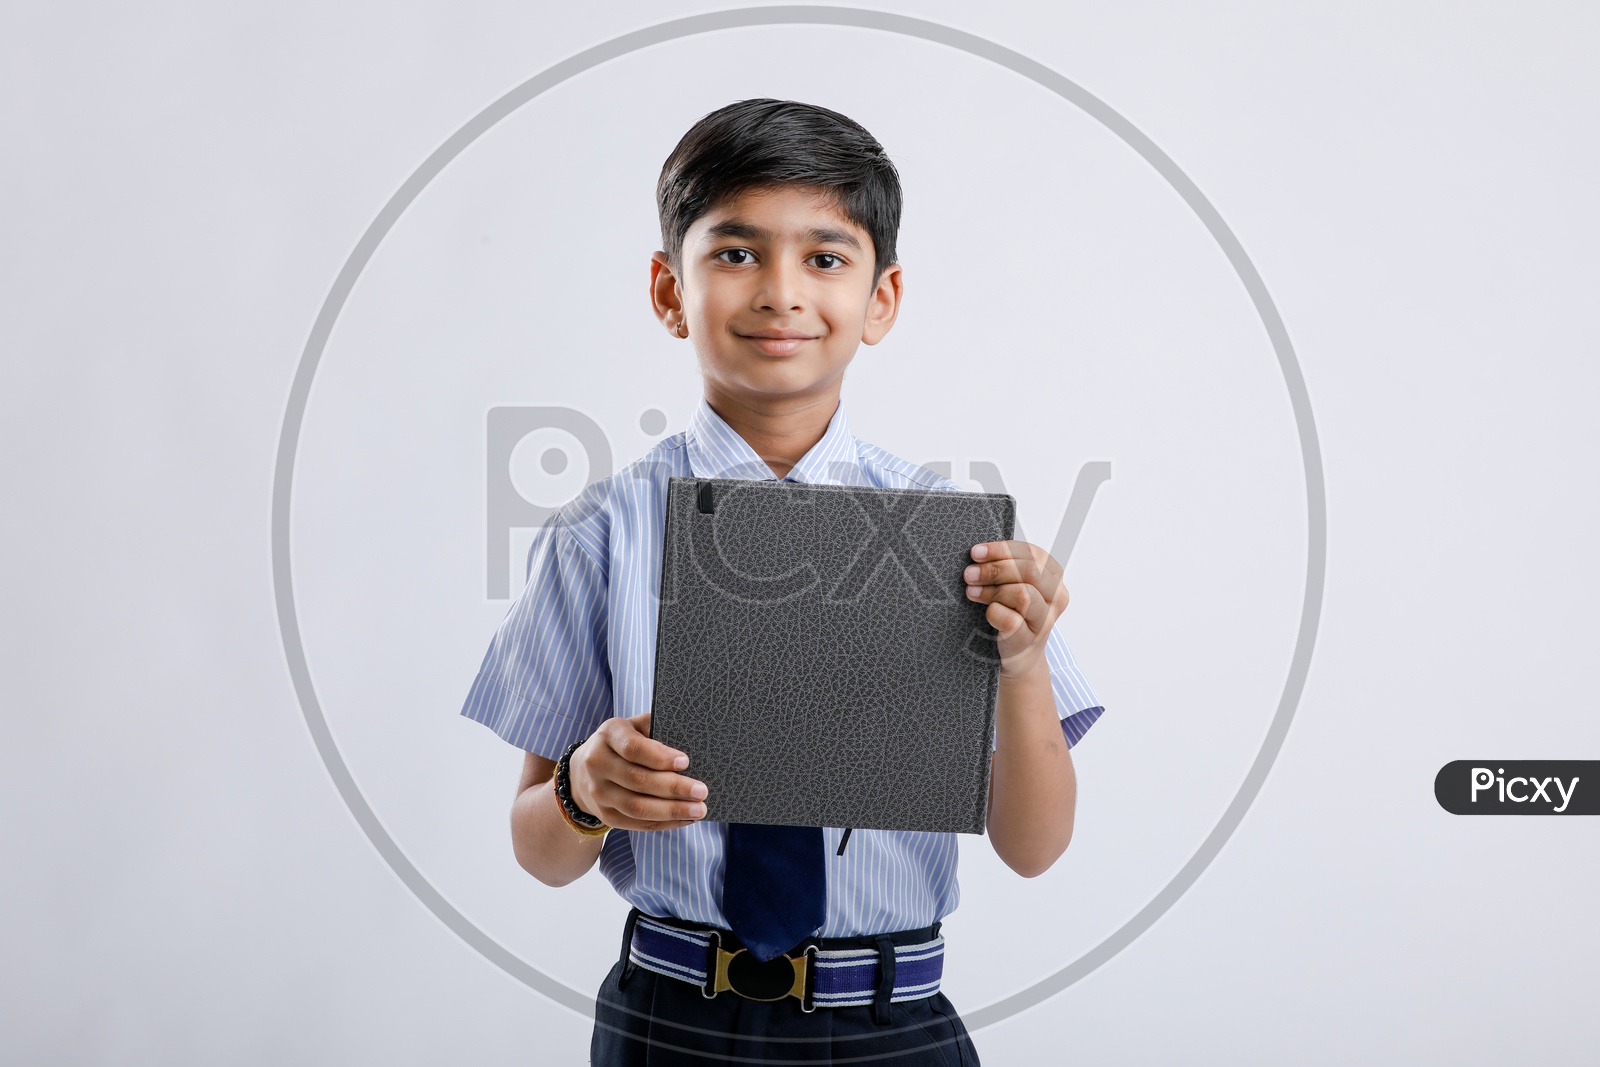 Indian or Asian Kid Or Boy  Or Student In School Uniform And  Holding  Book   Over an Isolated White Background